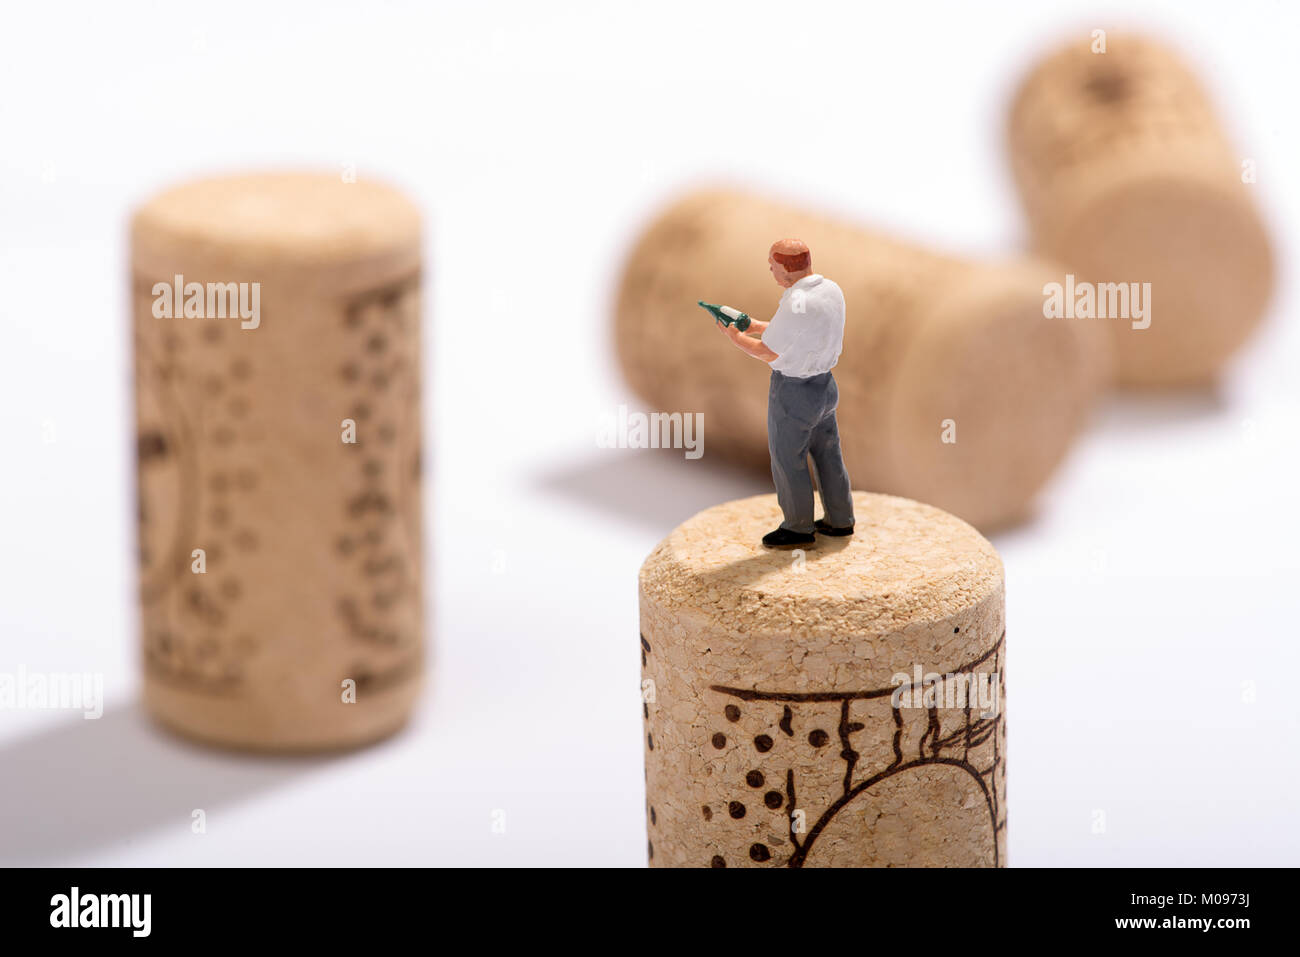 Miniature figure of a sommelier or wine expert standing on a cork looking at a bottle in his hand for pairings at a restaurant Stock Photo